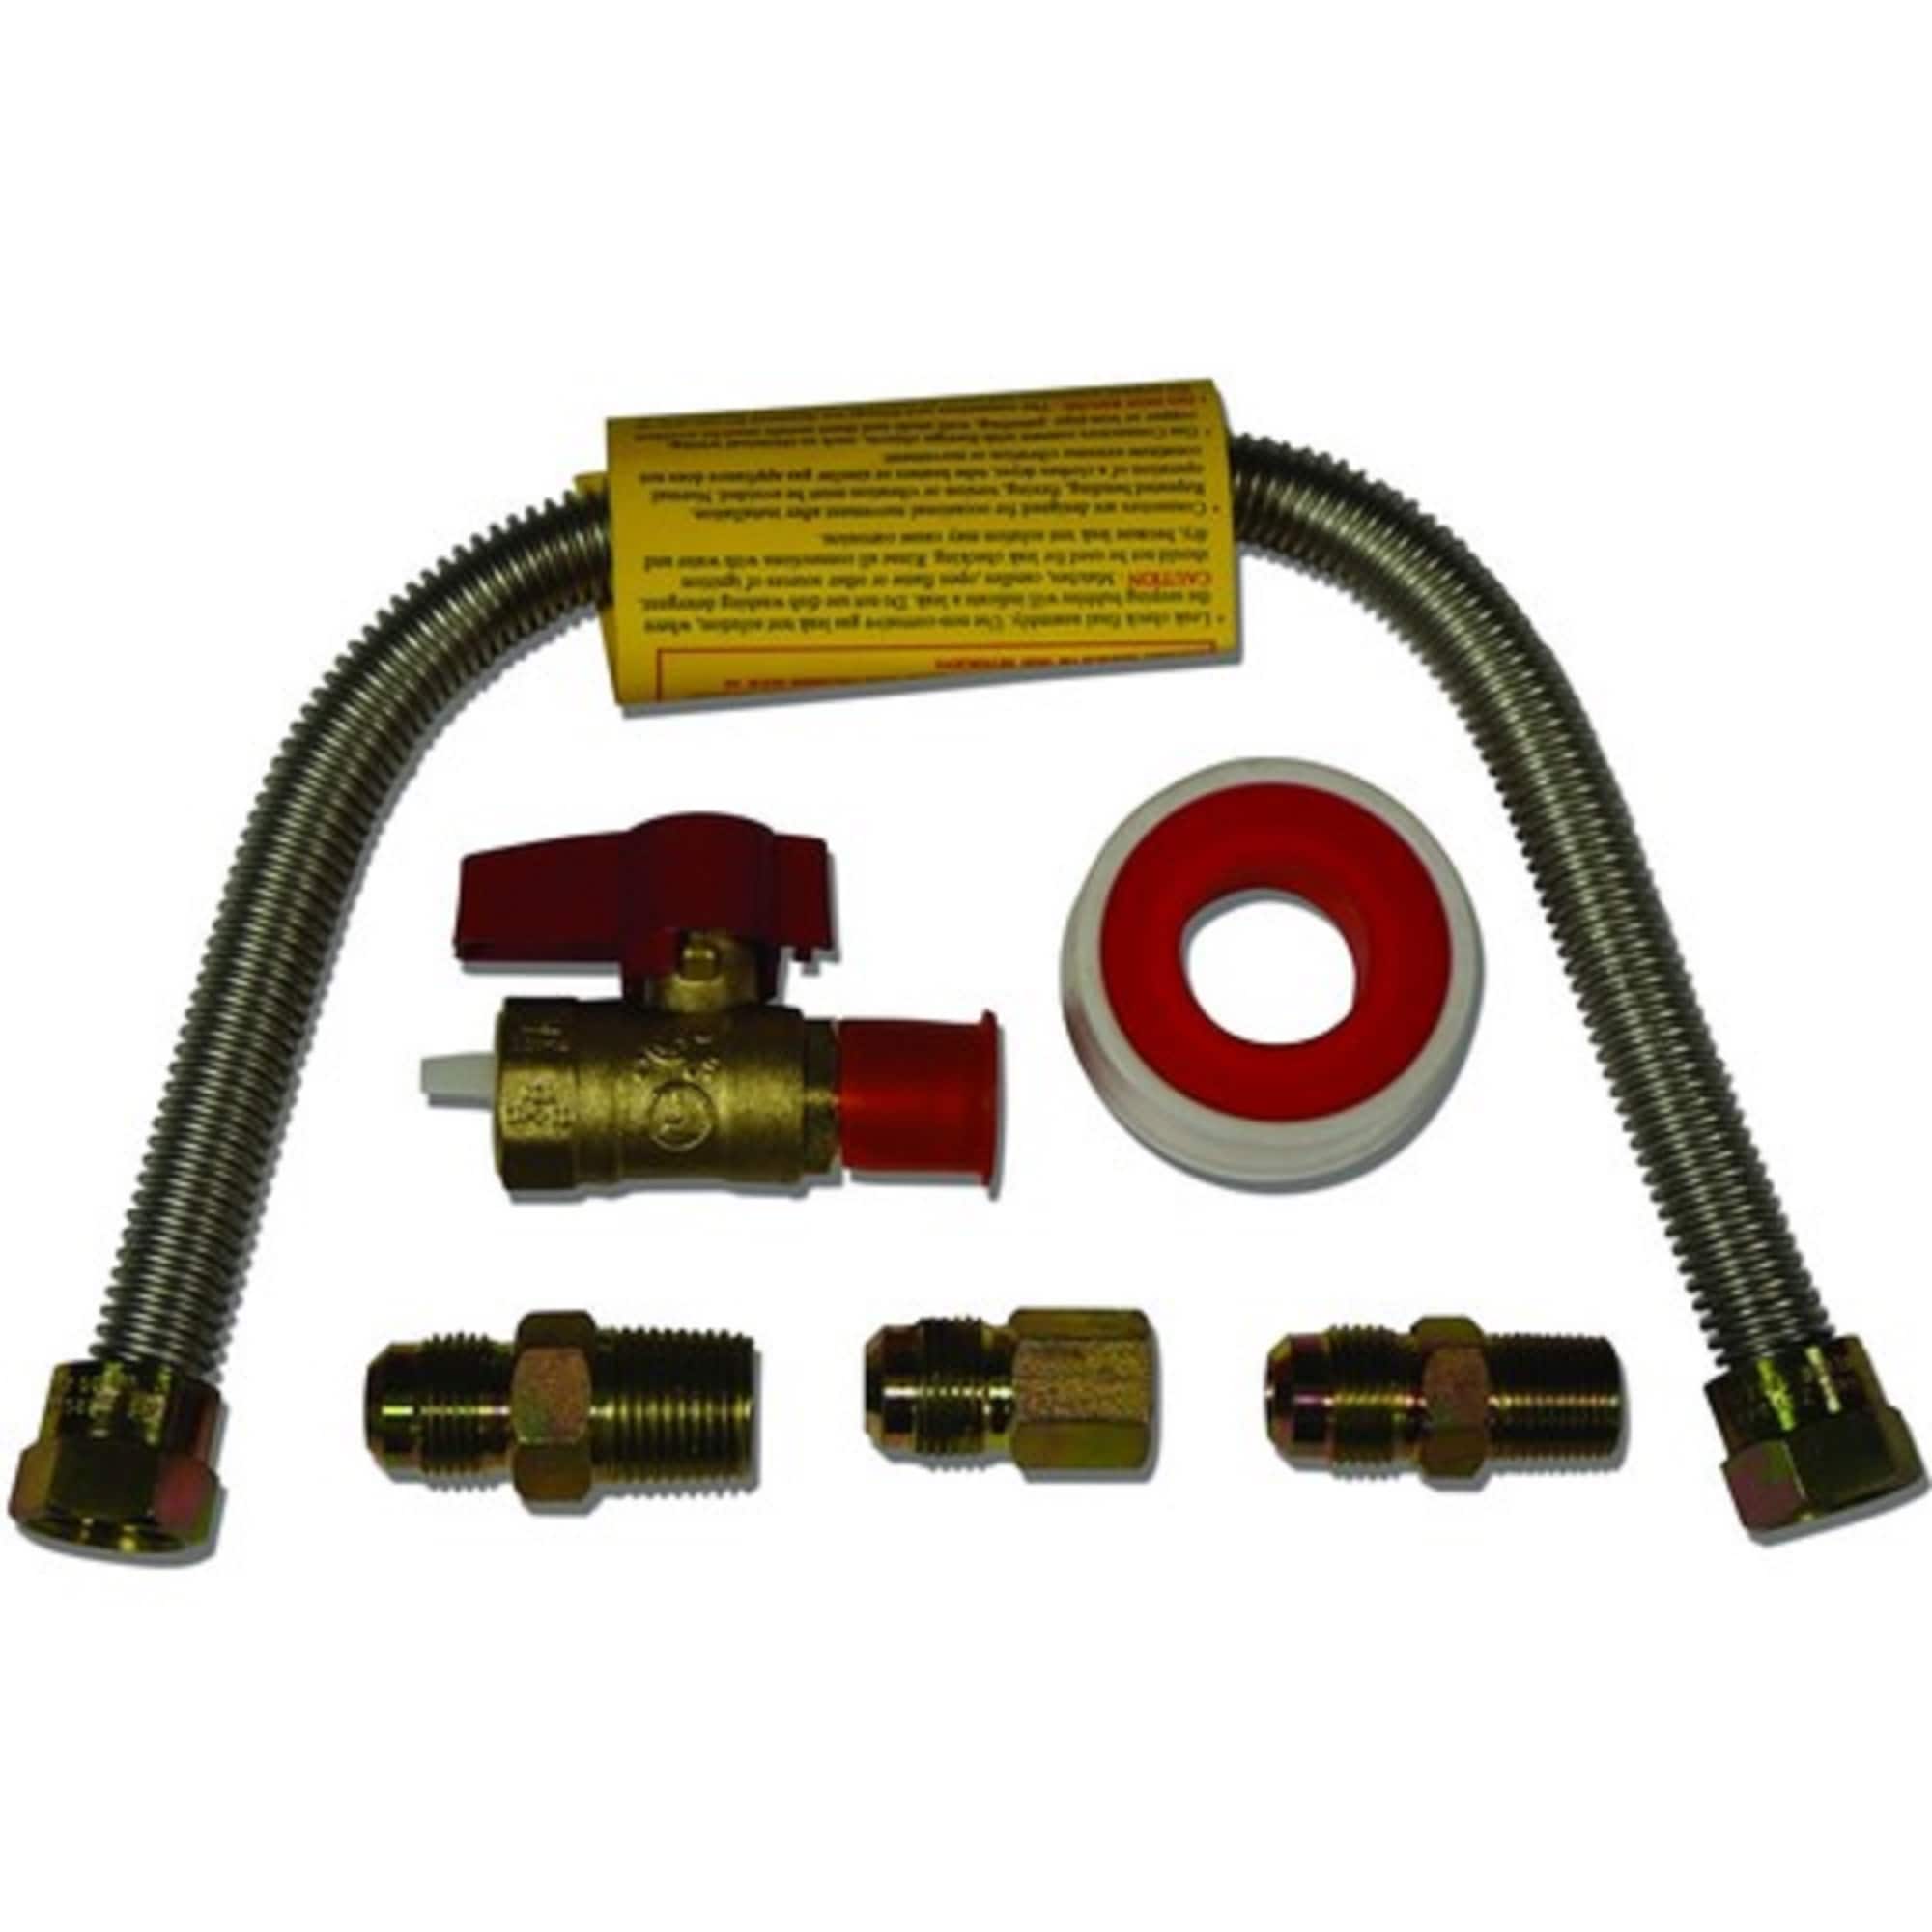 Quantity 1 Mr Heater F271239 Universal Gas Appliance Hookup Kit For Gas Logs 